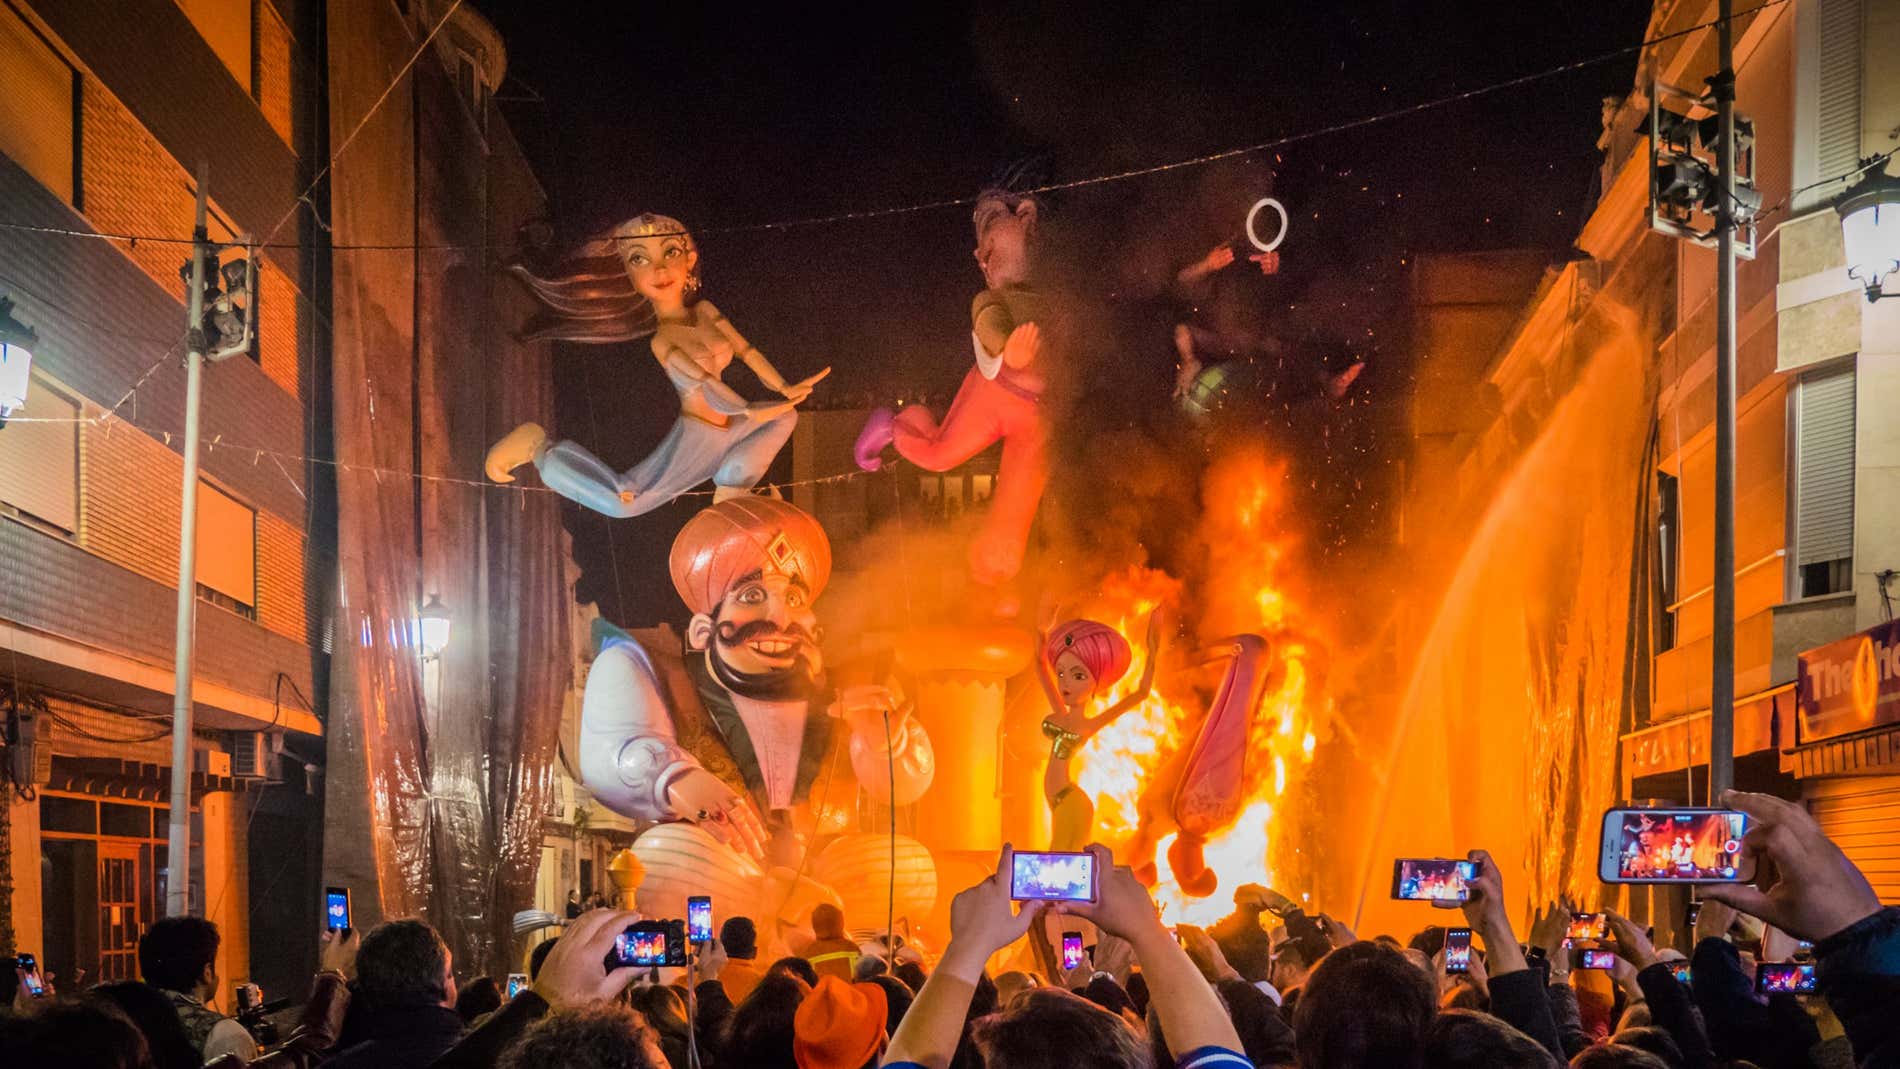 People take photos of large colourful effigies set on fire at night